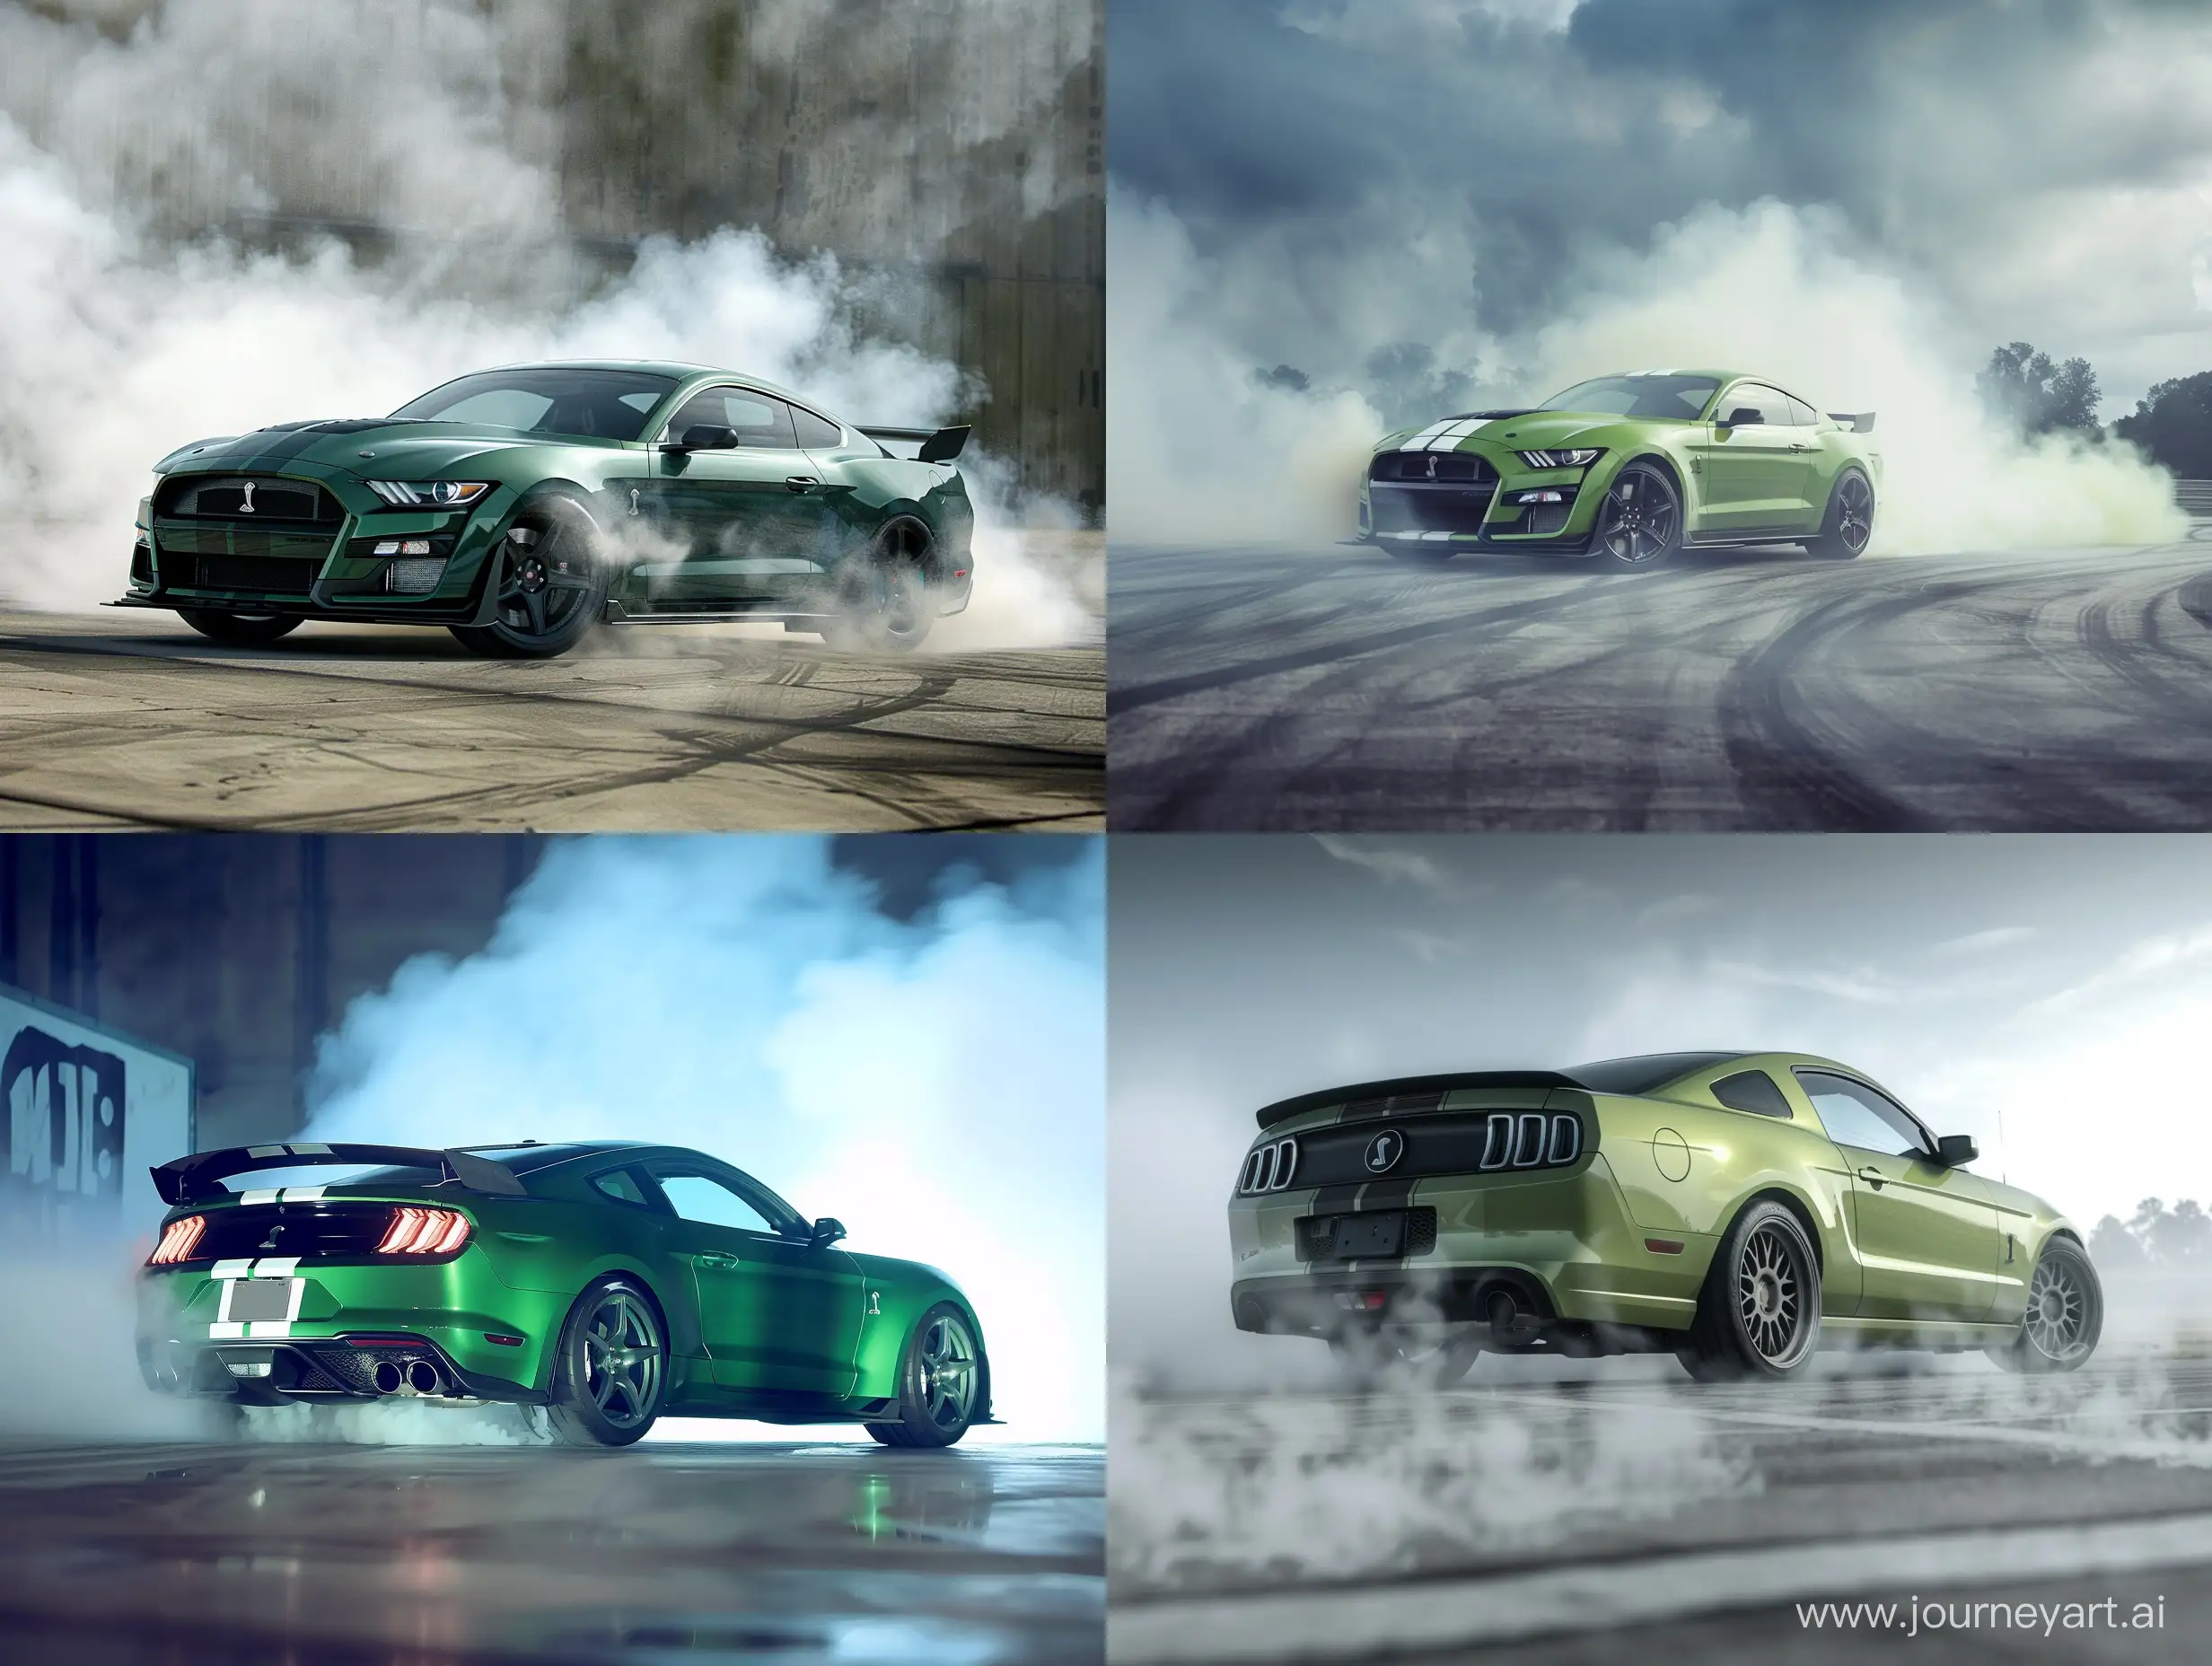 Surreal-HighSpeed-Capture-of-Green-Mustang-Shelby-Racing-with-Smoke-on-Tires